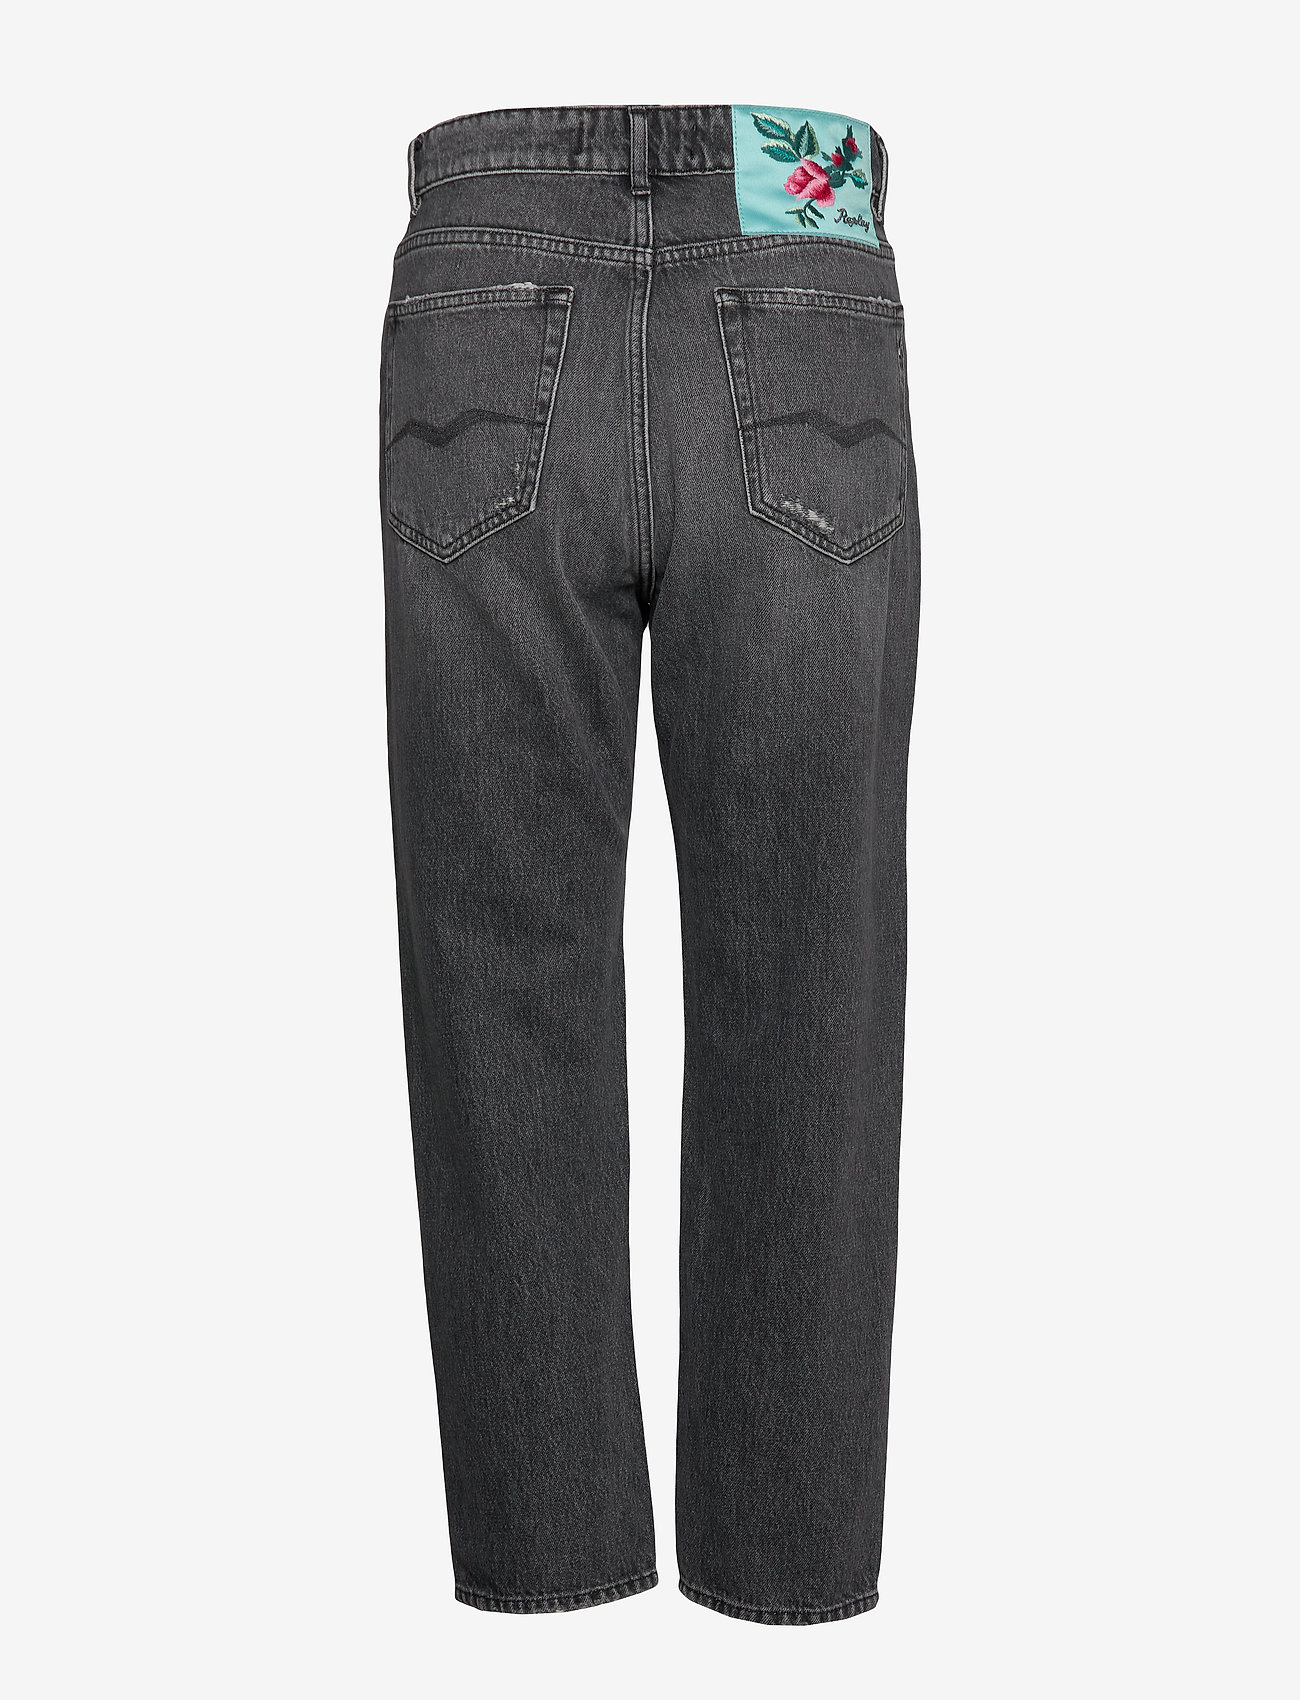 Replay - Trousers - straight jeans - dark grey - 1